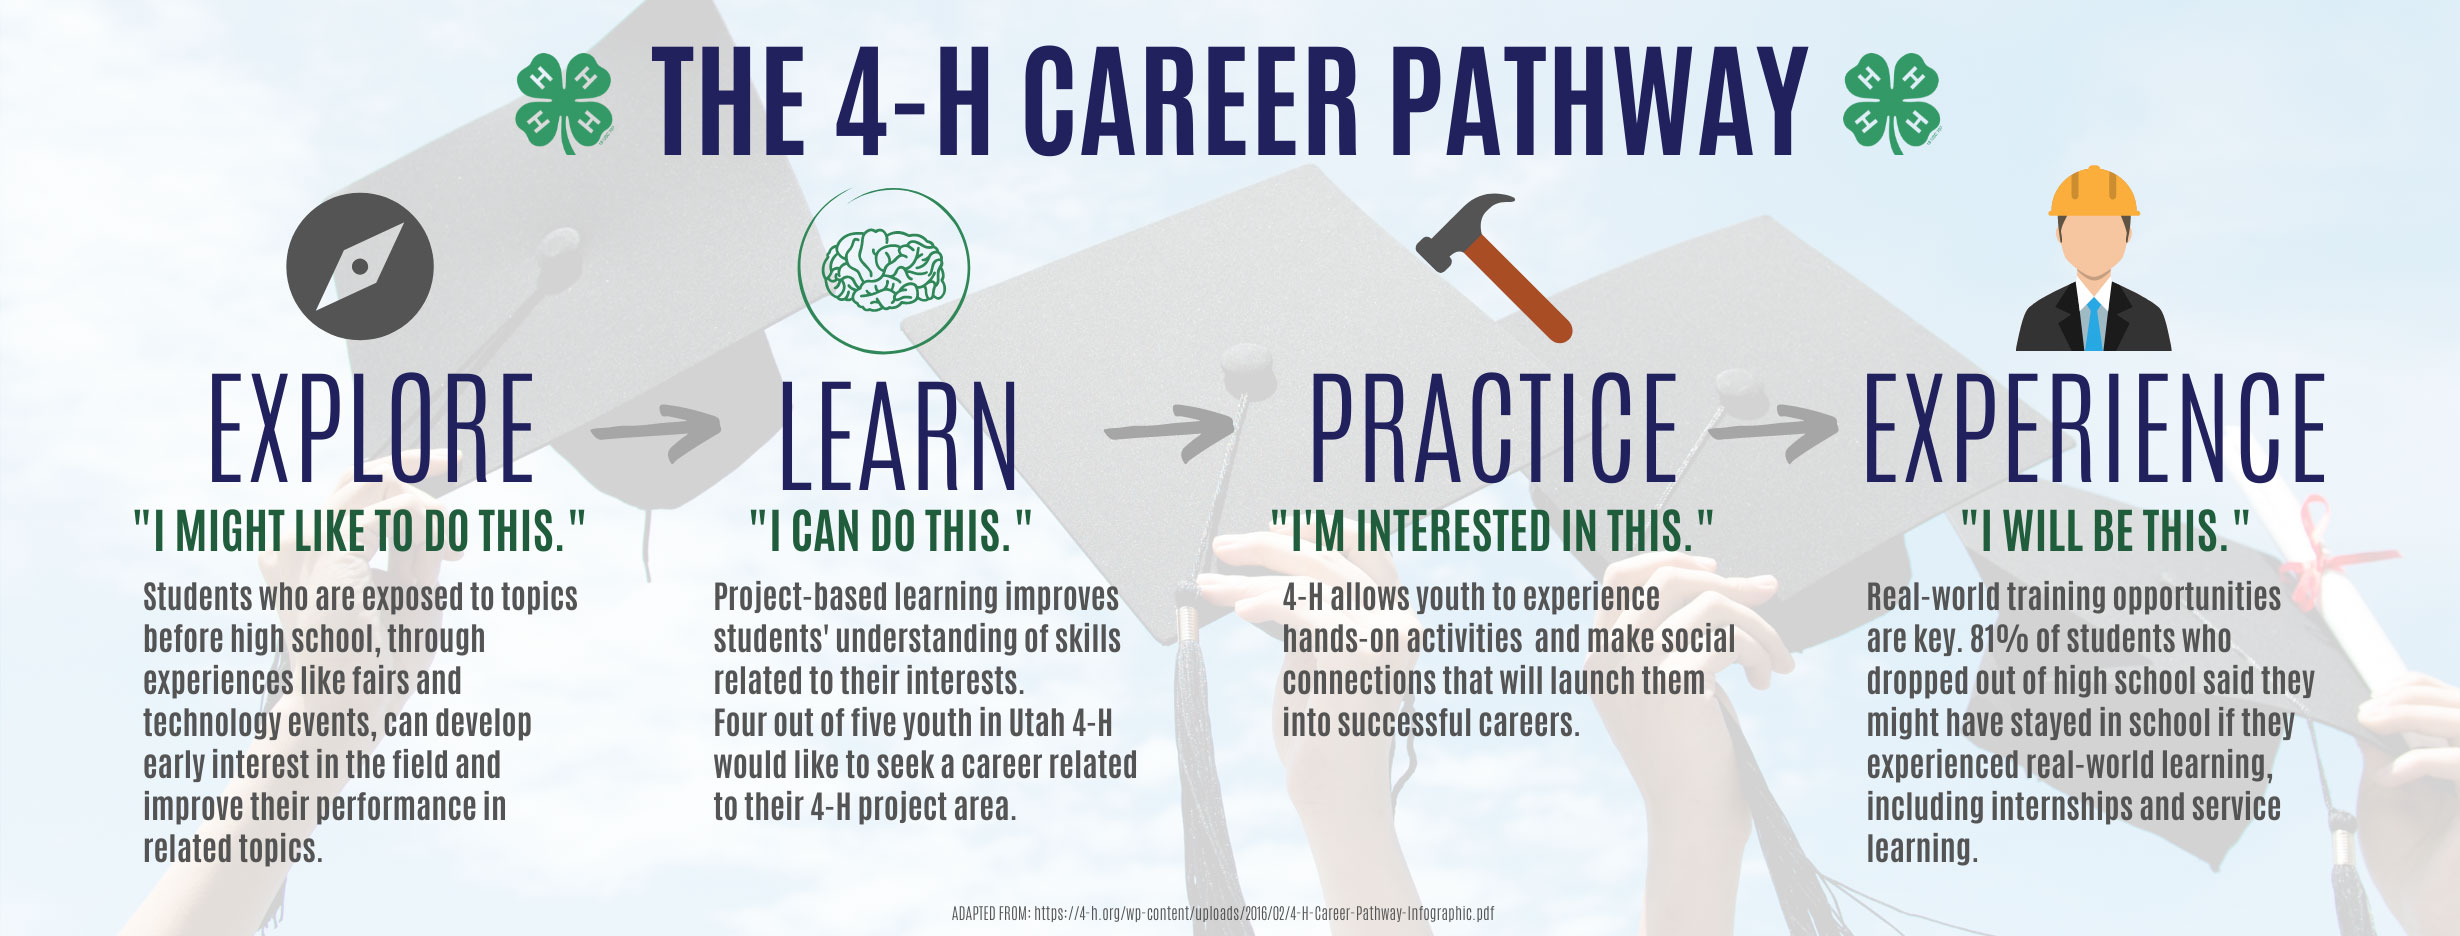 The 4-H Career Pathway